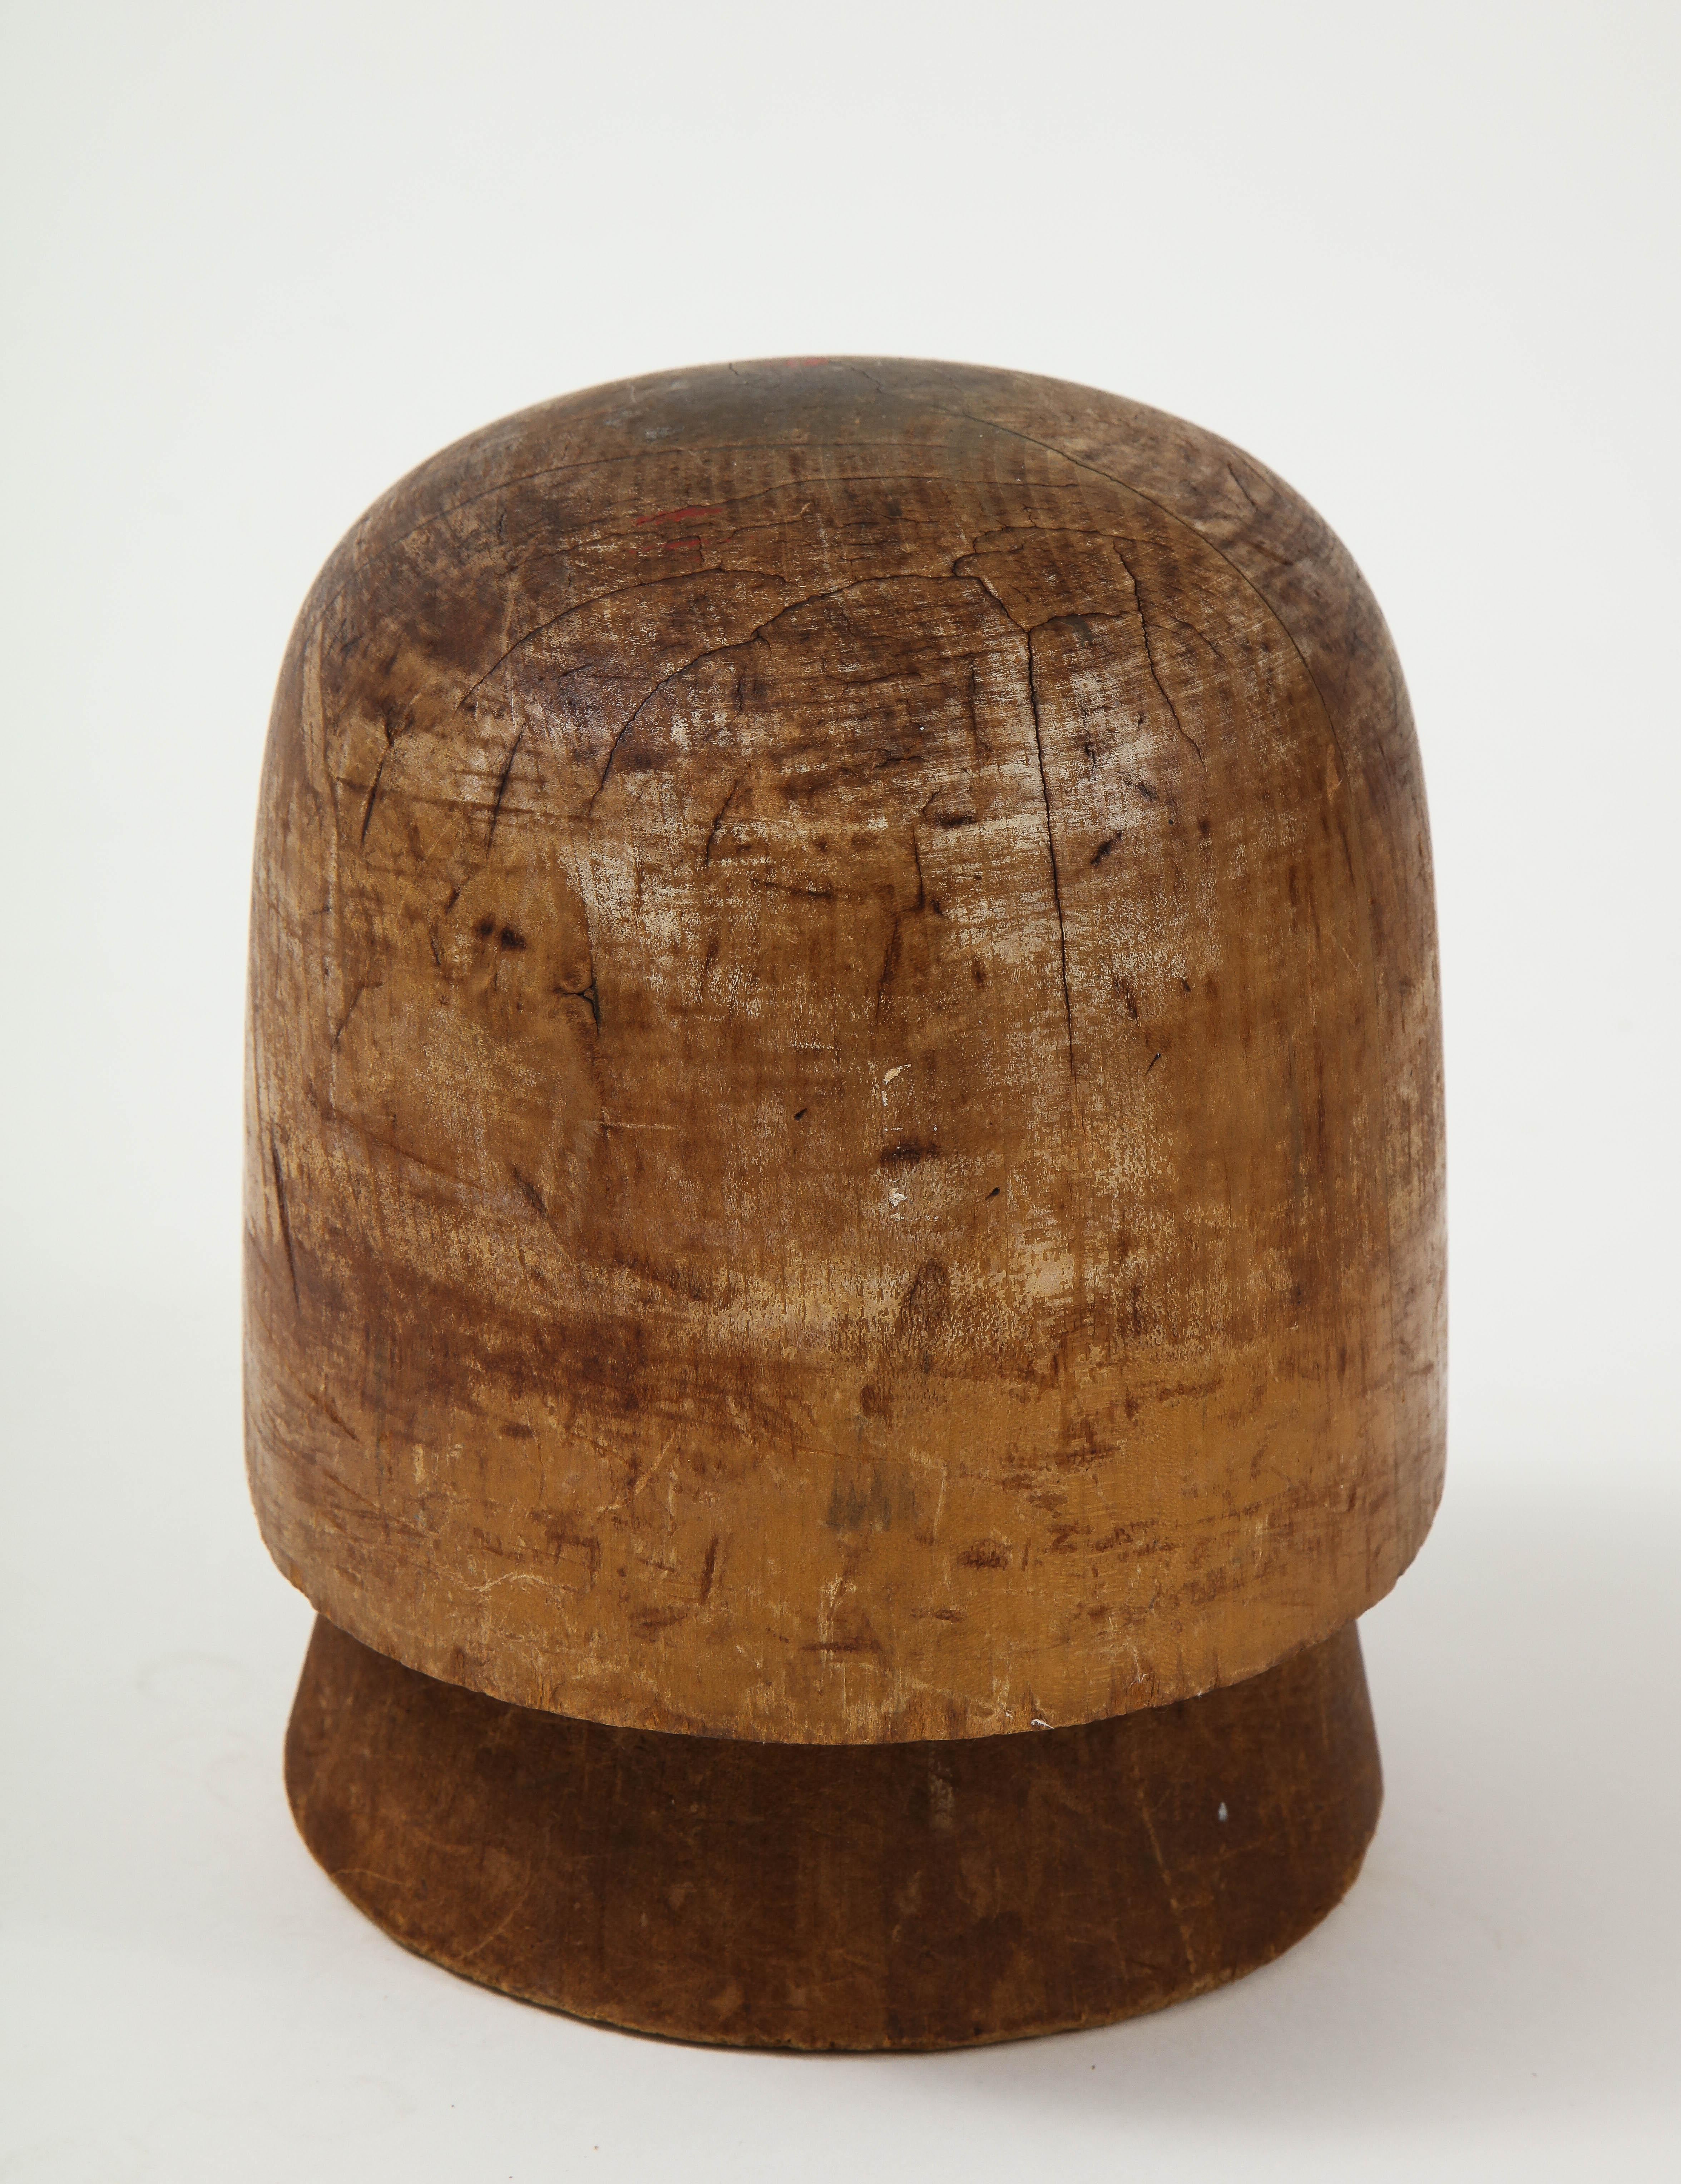 Nicely aged 2-piece wooden cloche hat form.